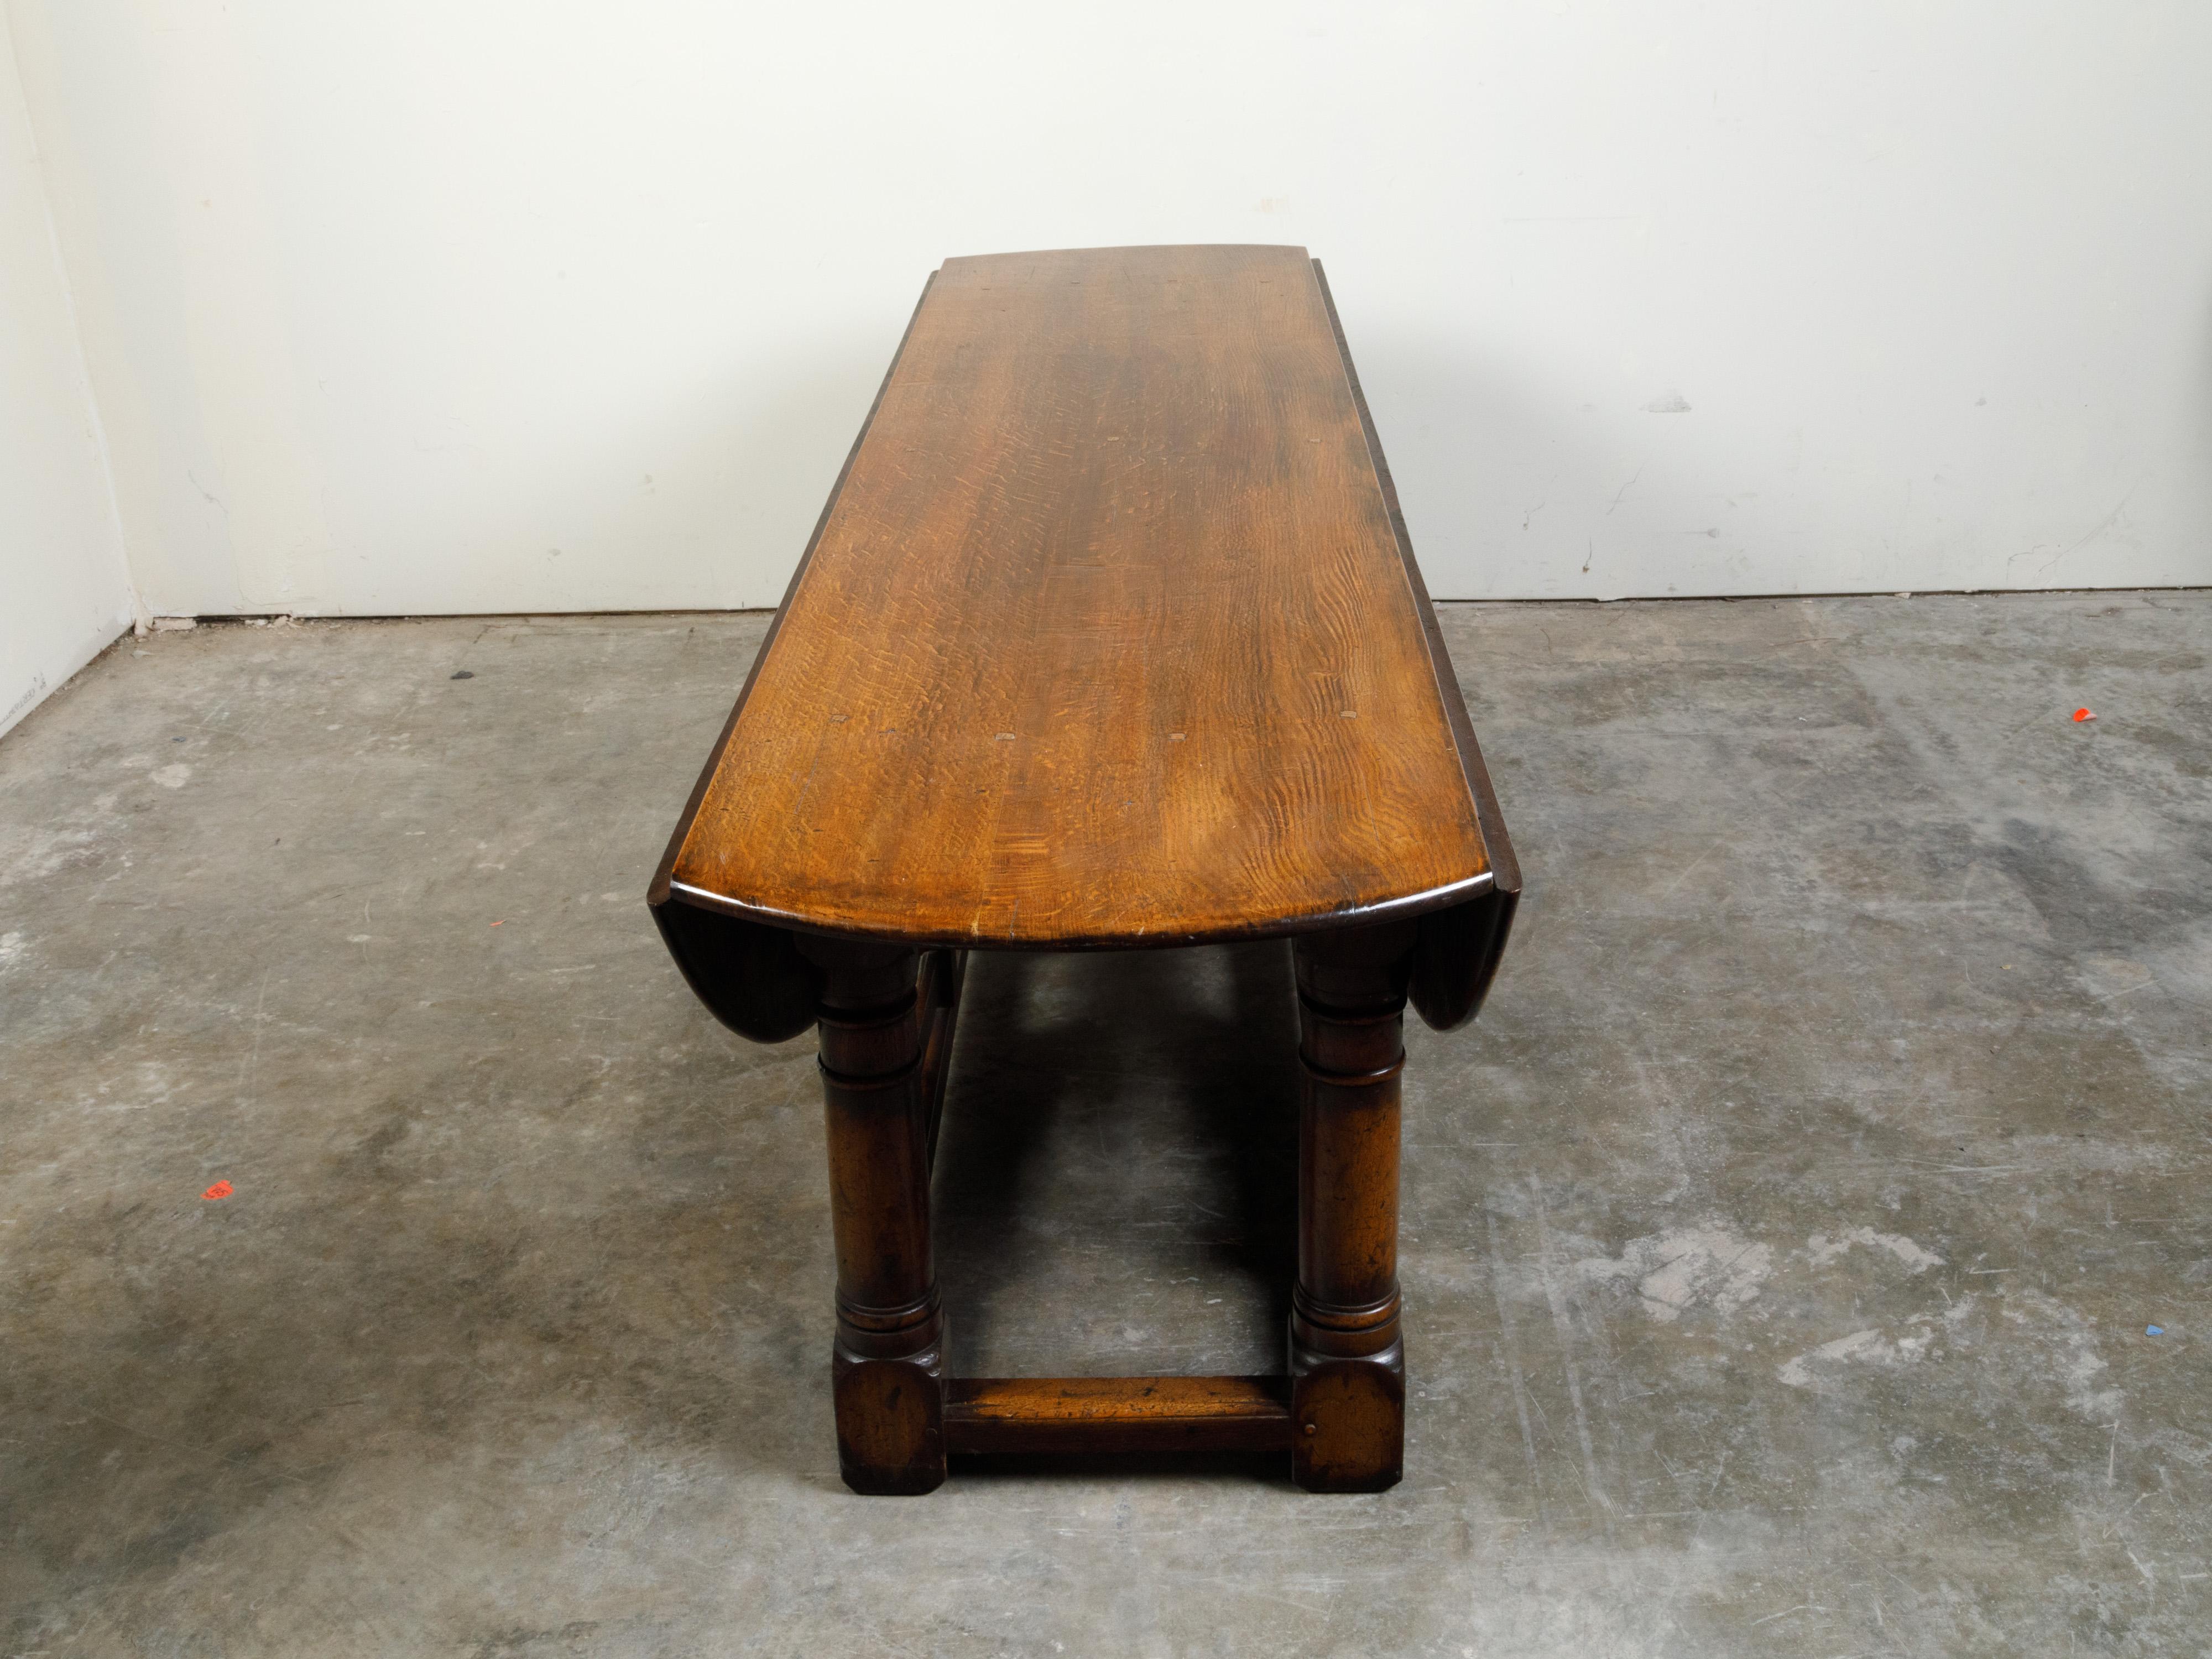 Turned English 19th Century Oak Drop-Leaf Oval Top Table with Gateleg Base